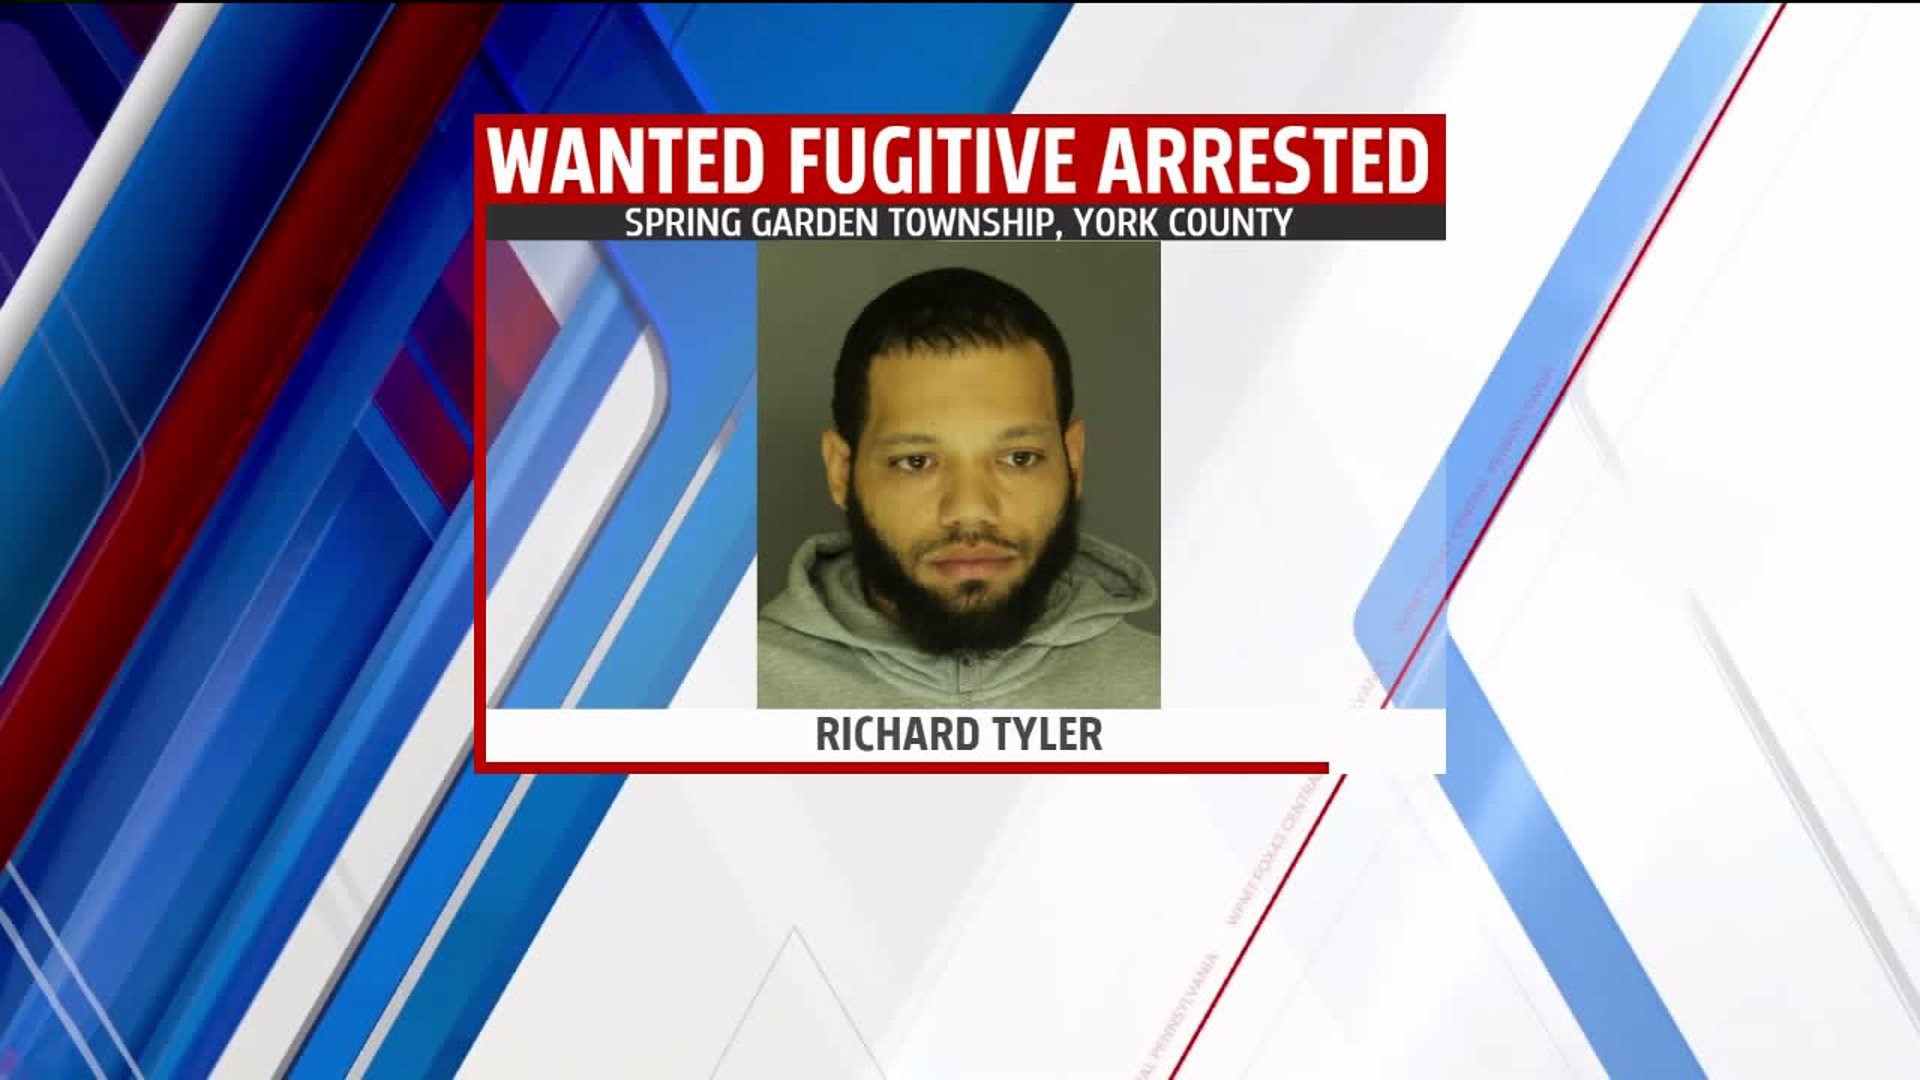 One of PA`s `Most Wanted` fugitives arrested in York County, U.S. Marshals Service says